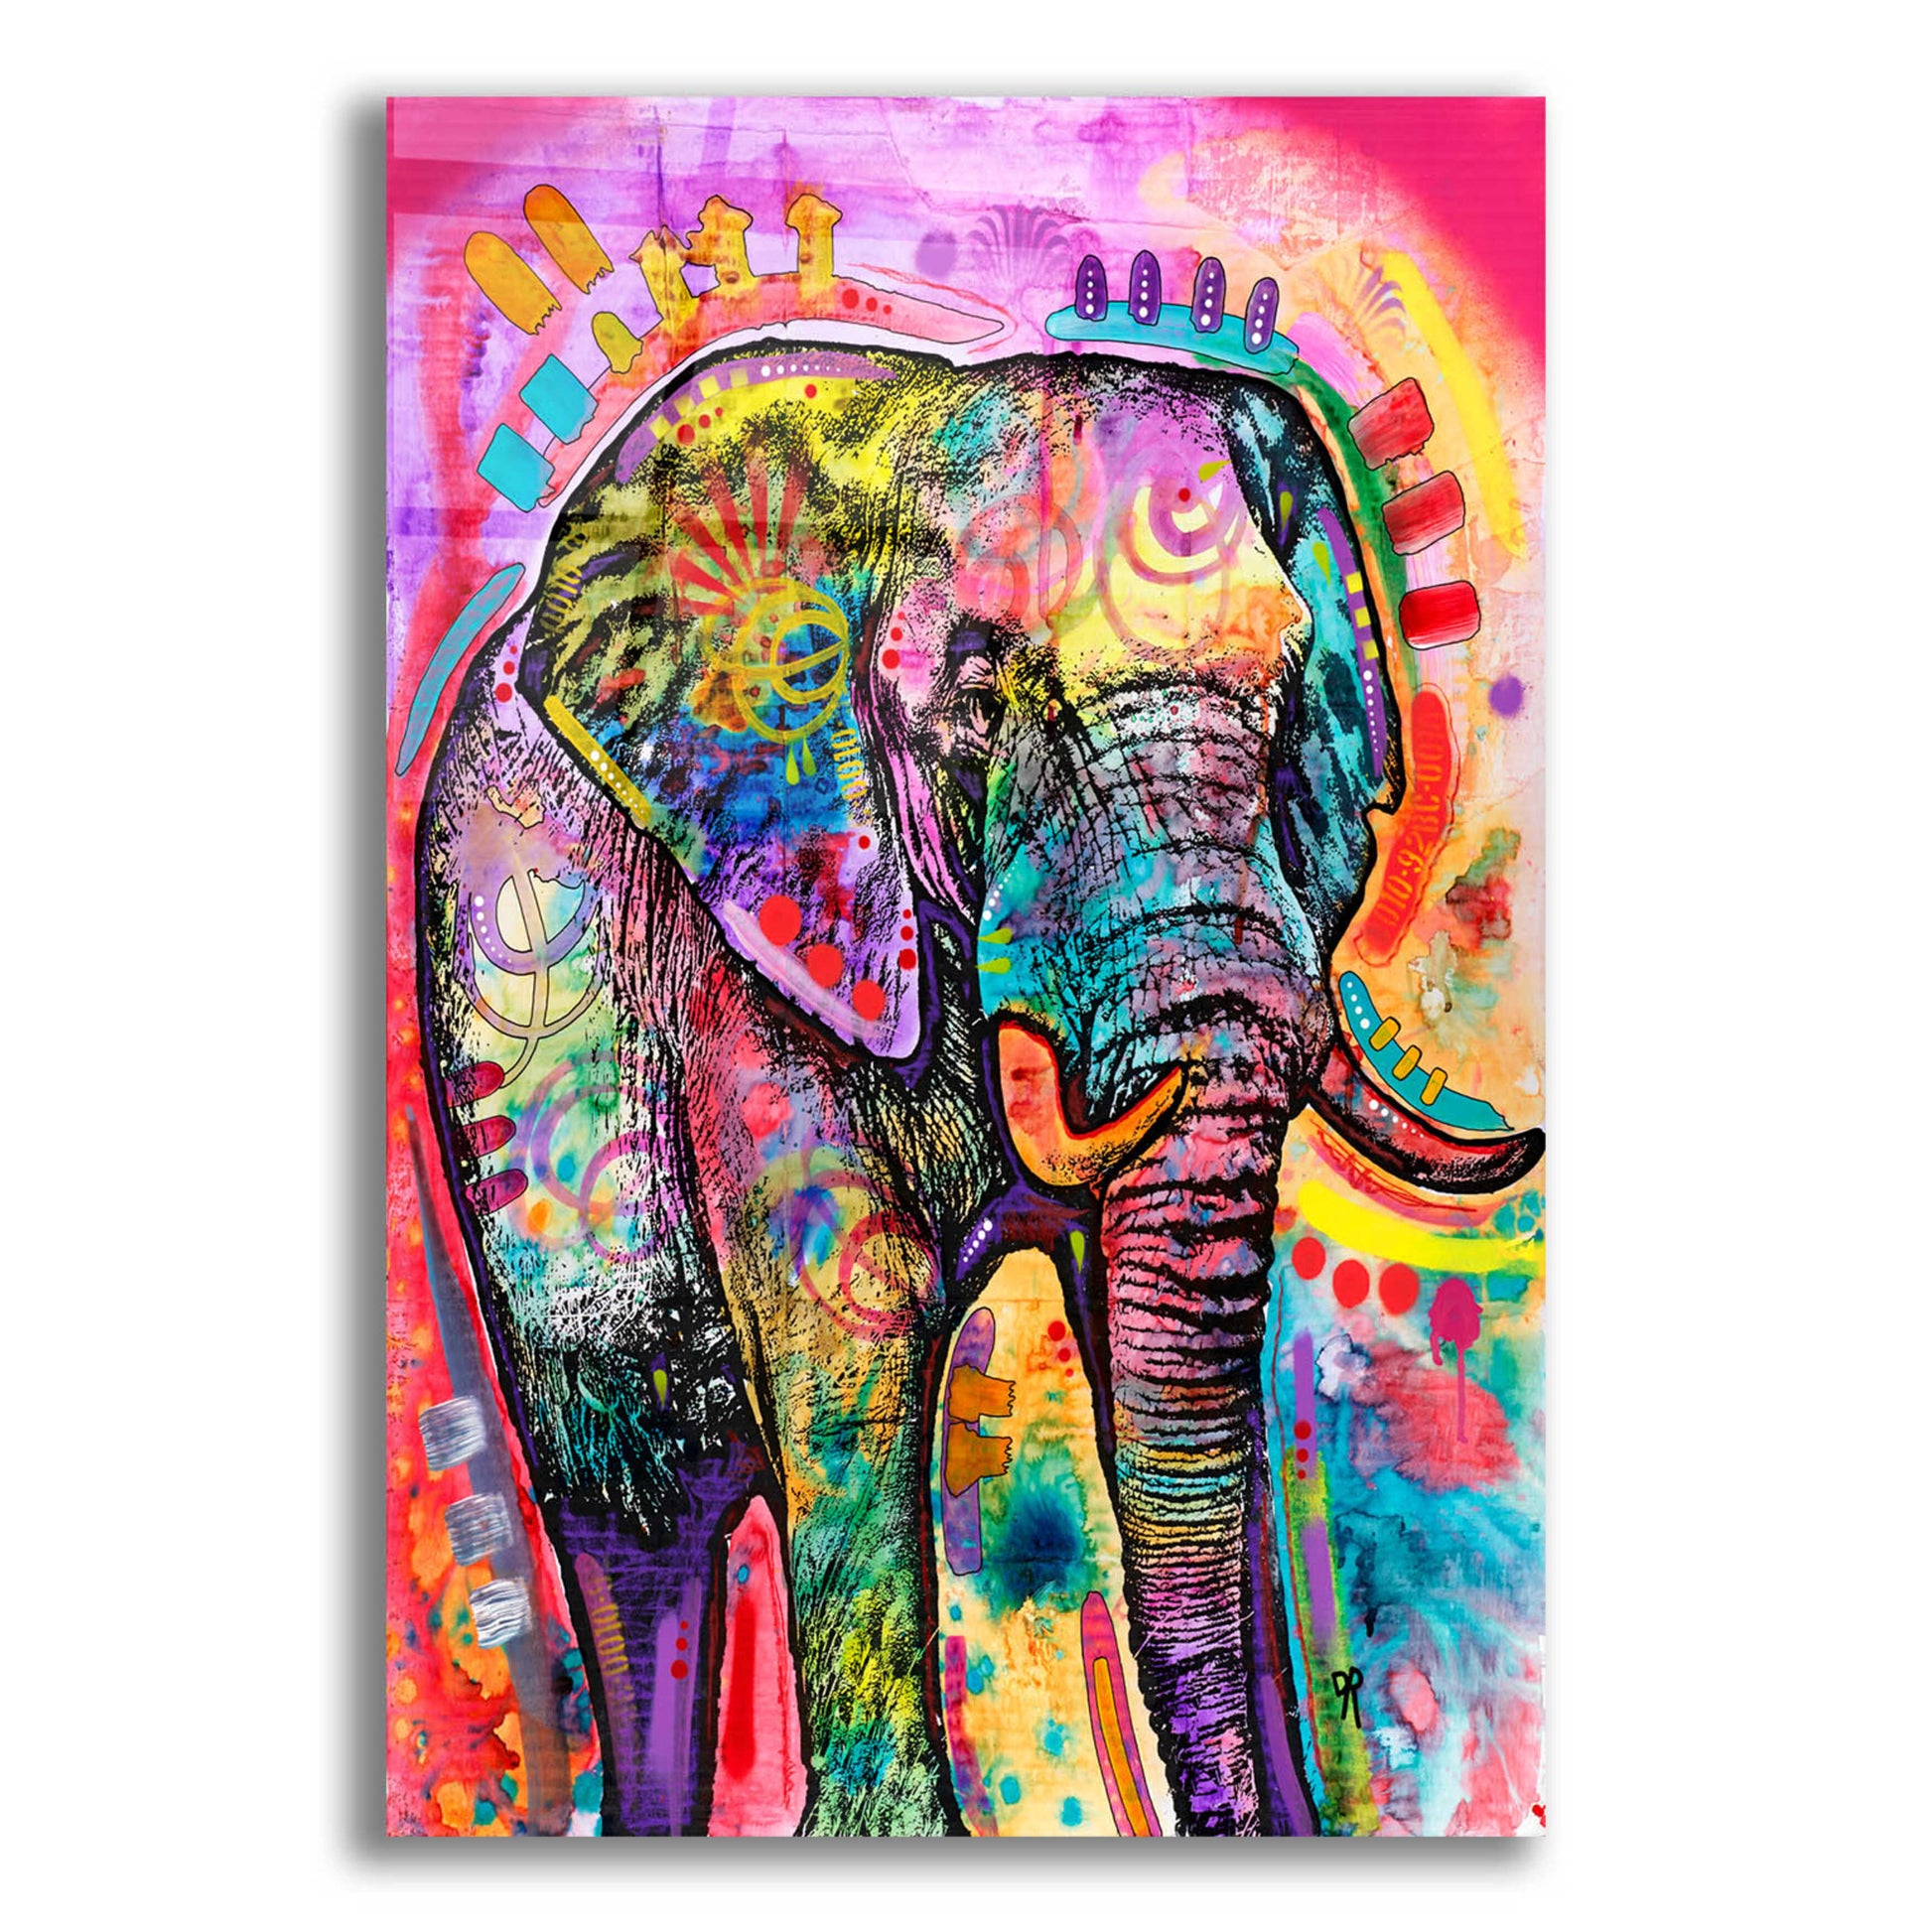 Epic Art 'Elephant in Charge' by Dean Russo, Acrylic Glass Wall Art,12x16